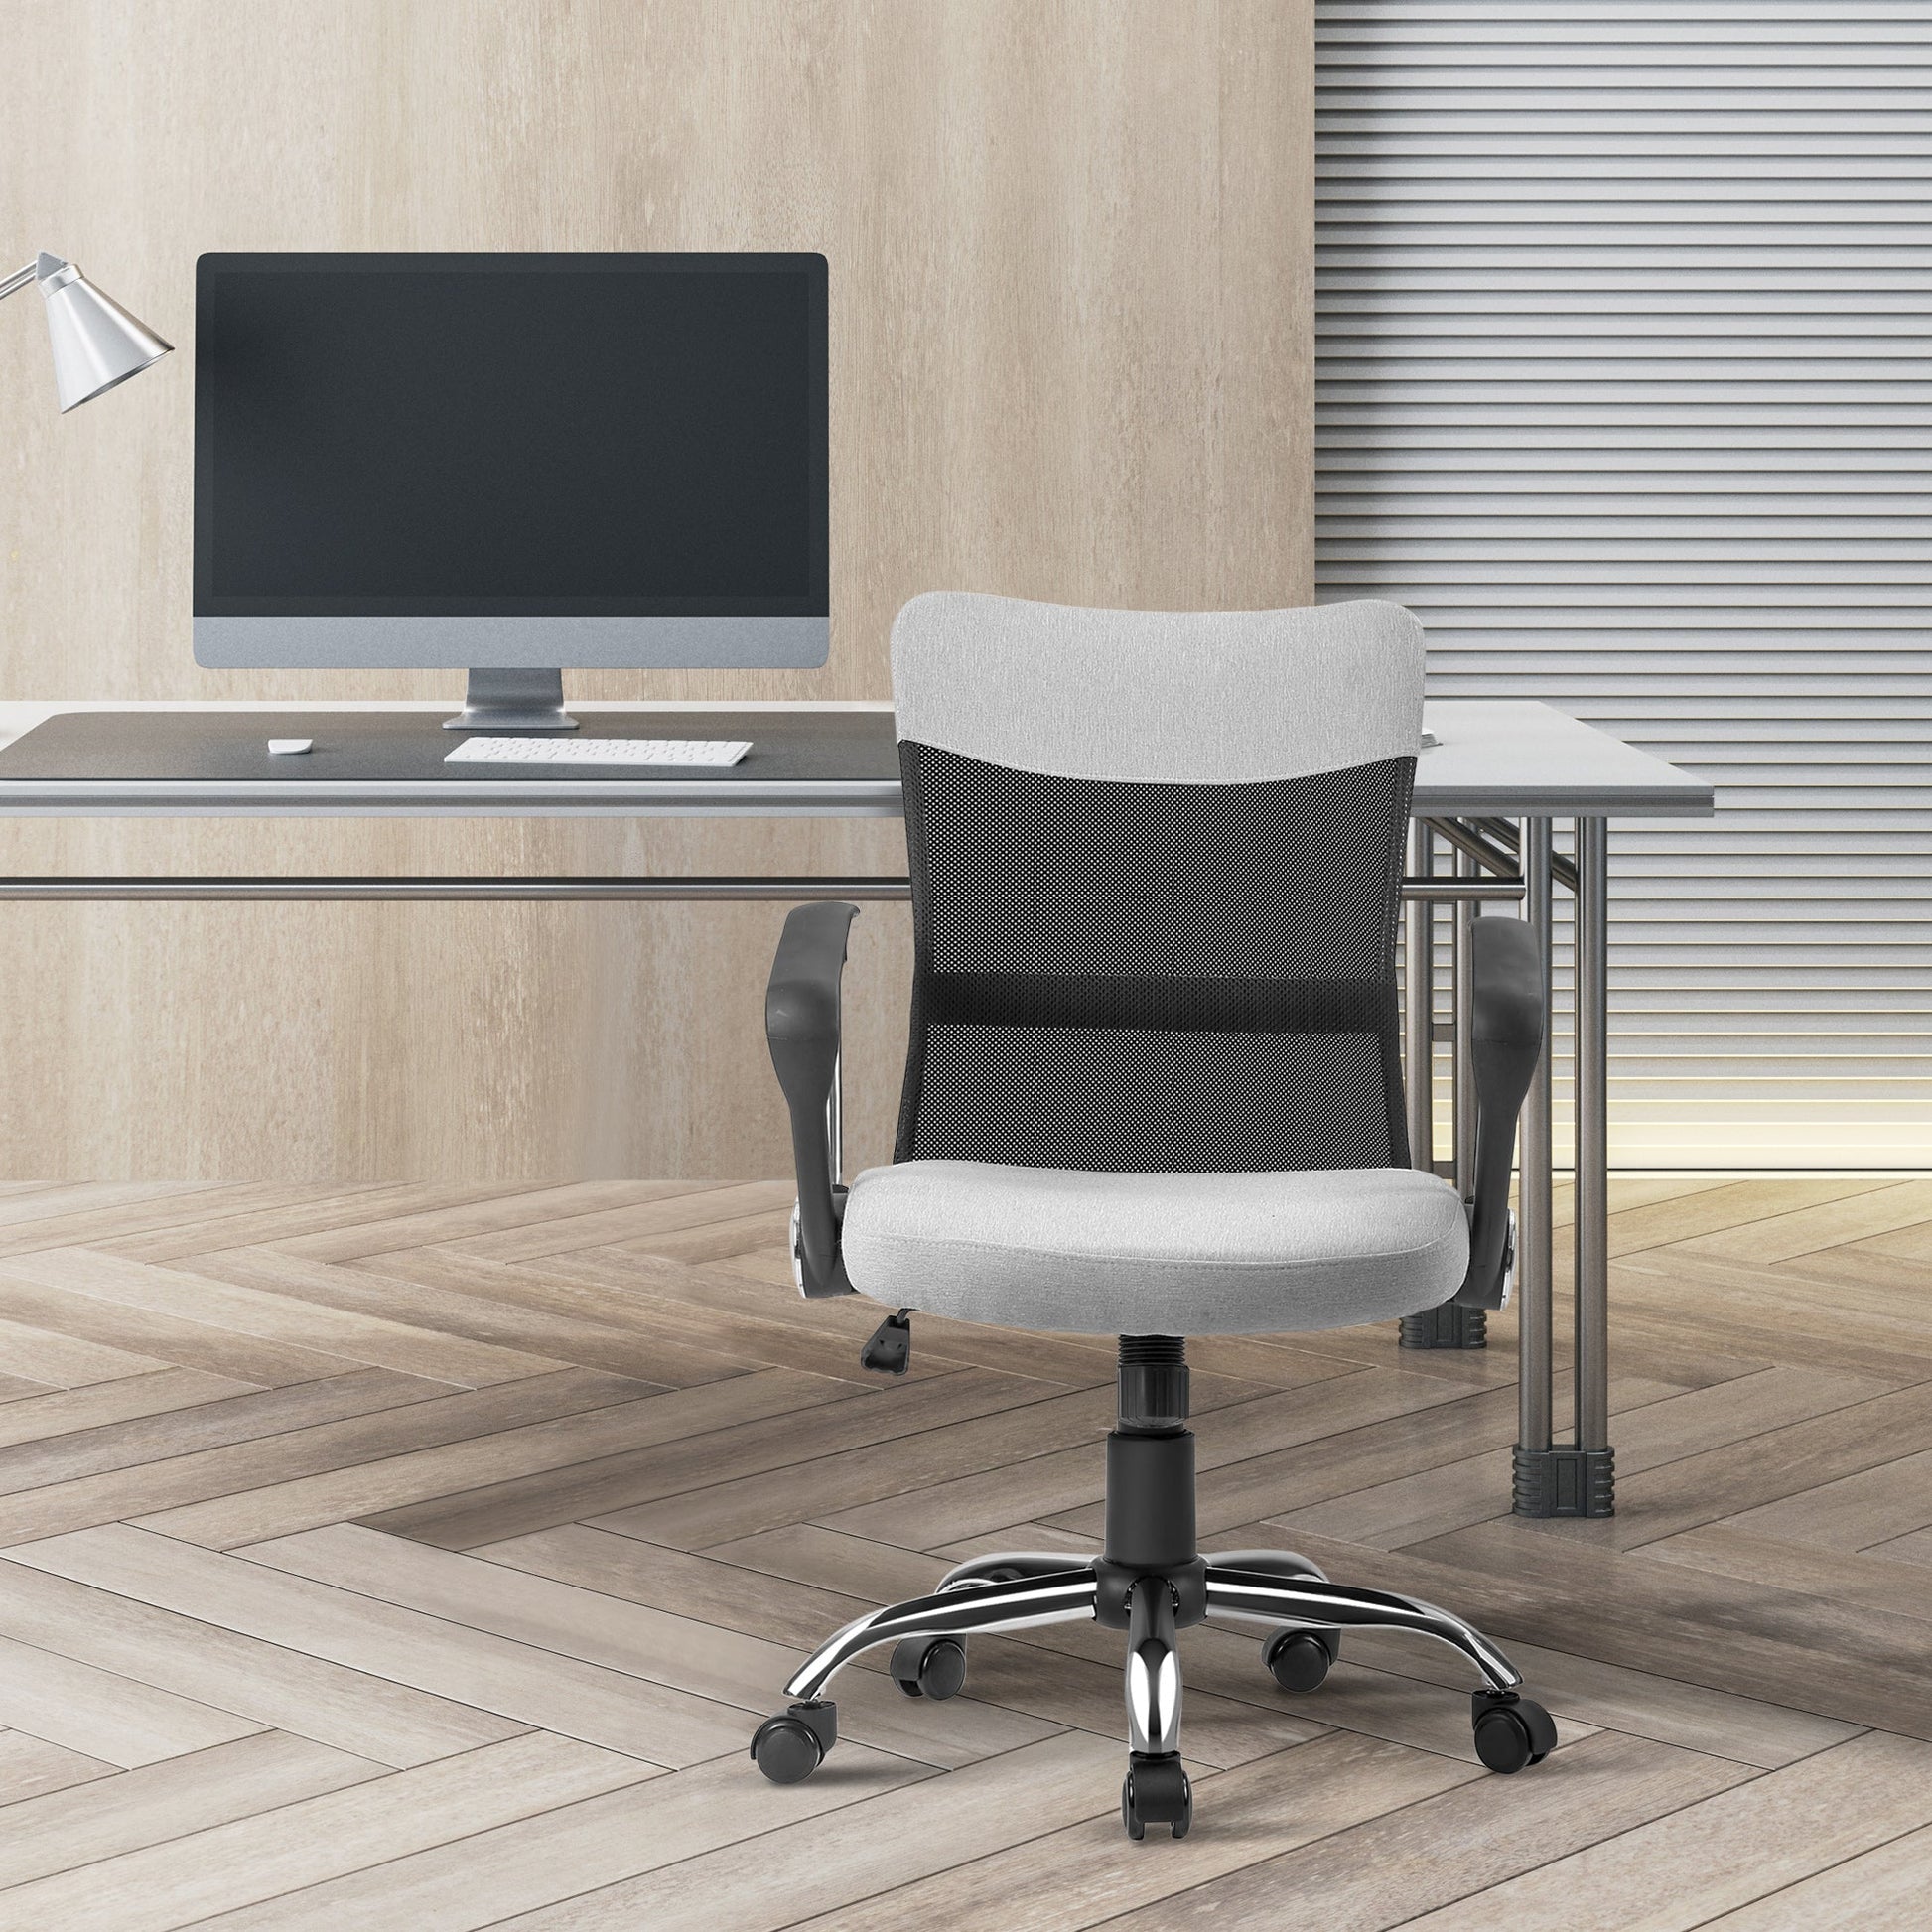 Ergonomic Office Chair, Mid Back Mesh Chair with Armrests, Adjustable Height, Grey and Black at Gallery Canada